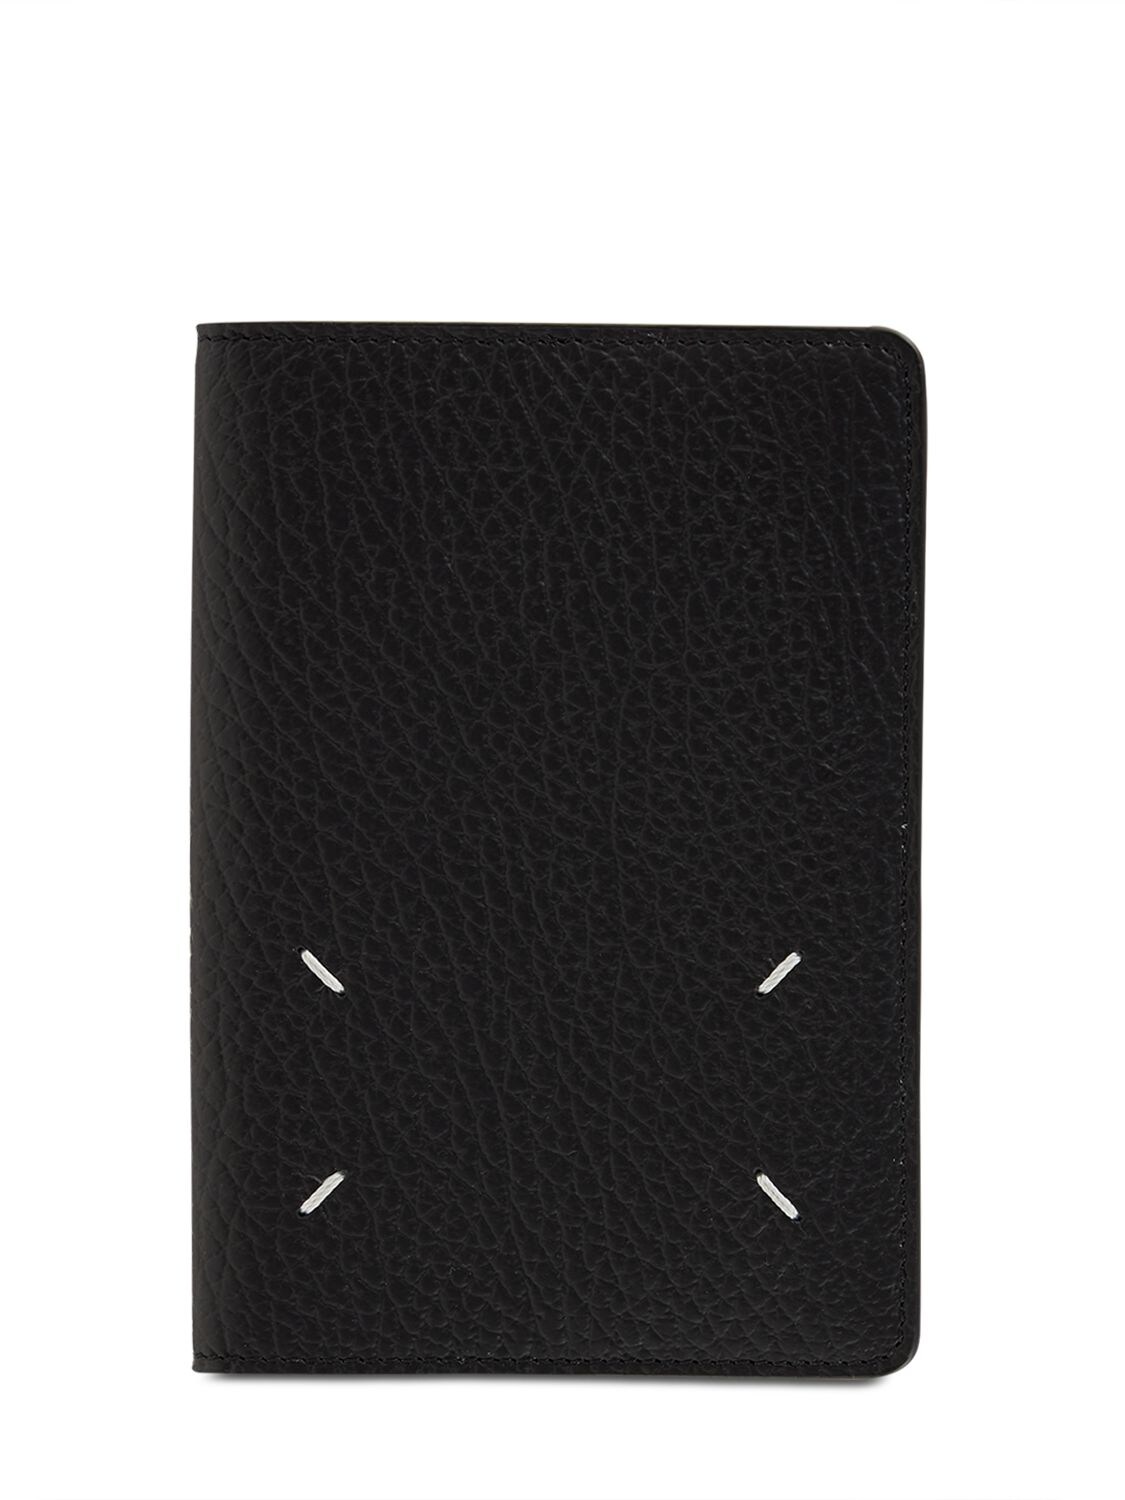 Grained Leather Passport Cover